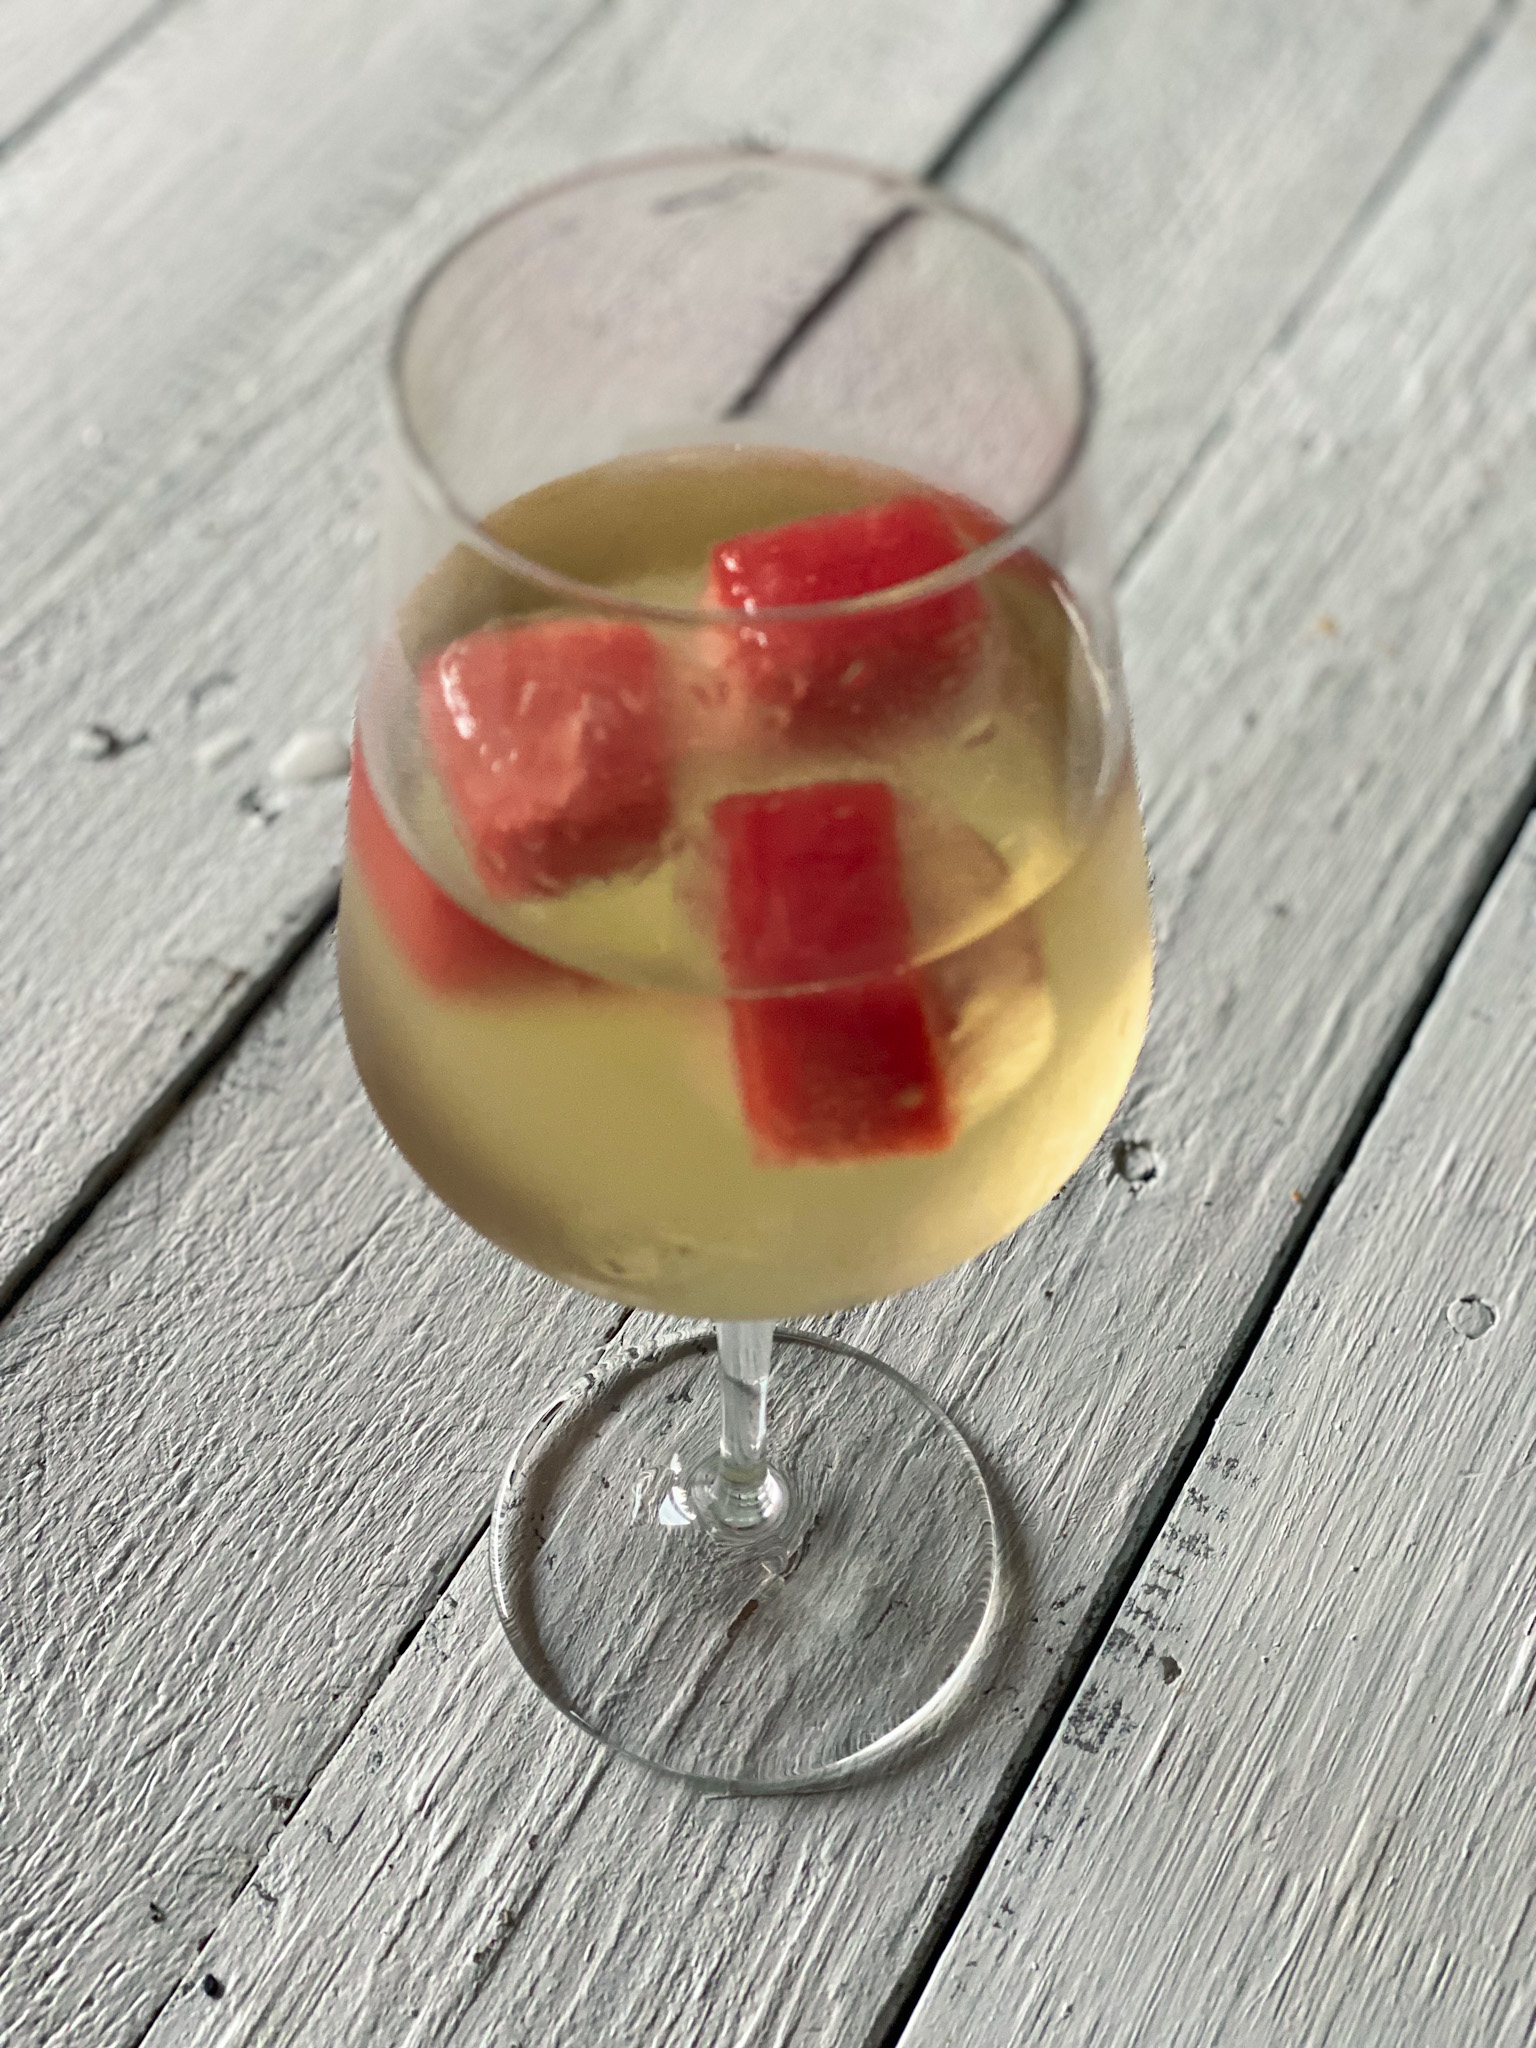 Watermelon ice cubes in a glass of wine